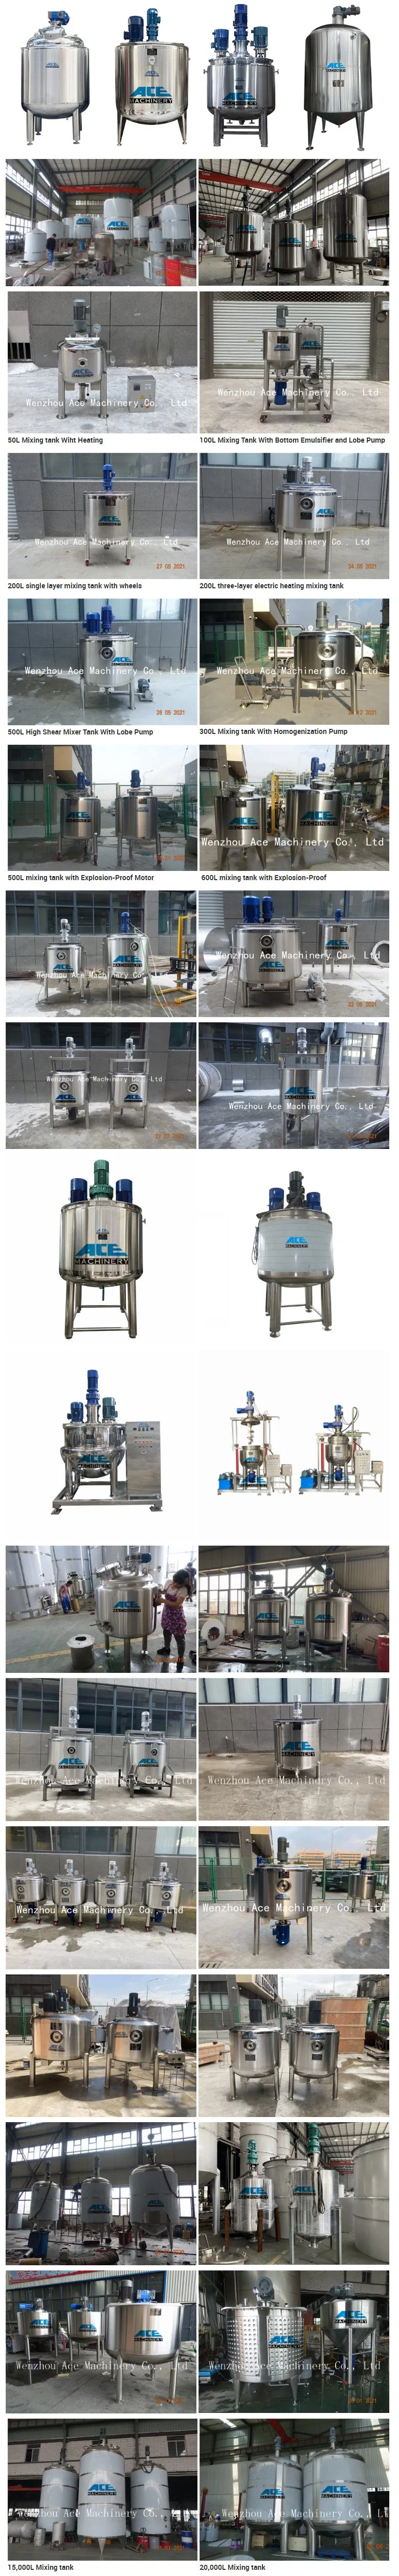 Stainless Steel SS316 1500L Lubrication Grease Heating Melting Jacketed Vacuum Mixing Tank for Chemicals Products